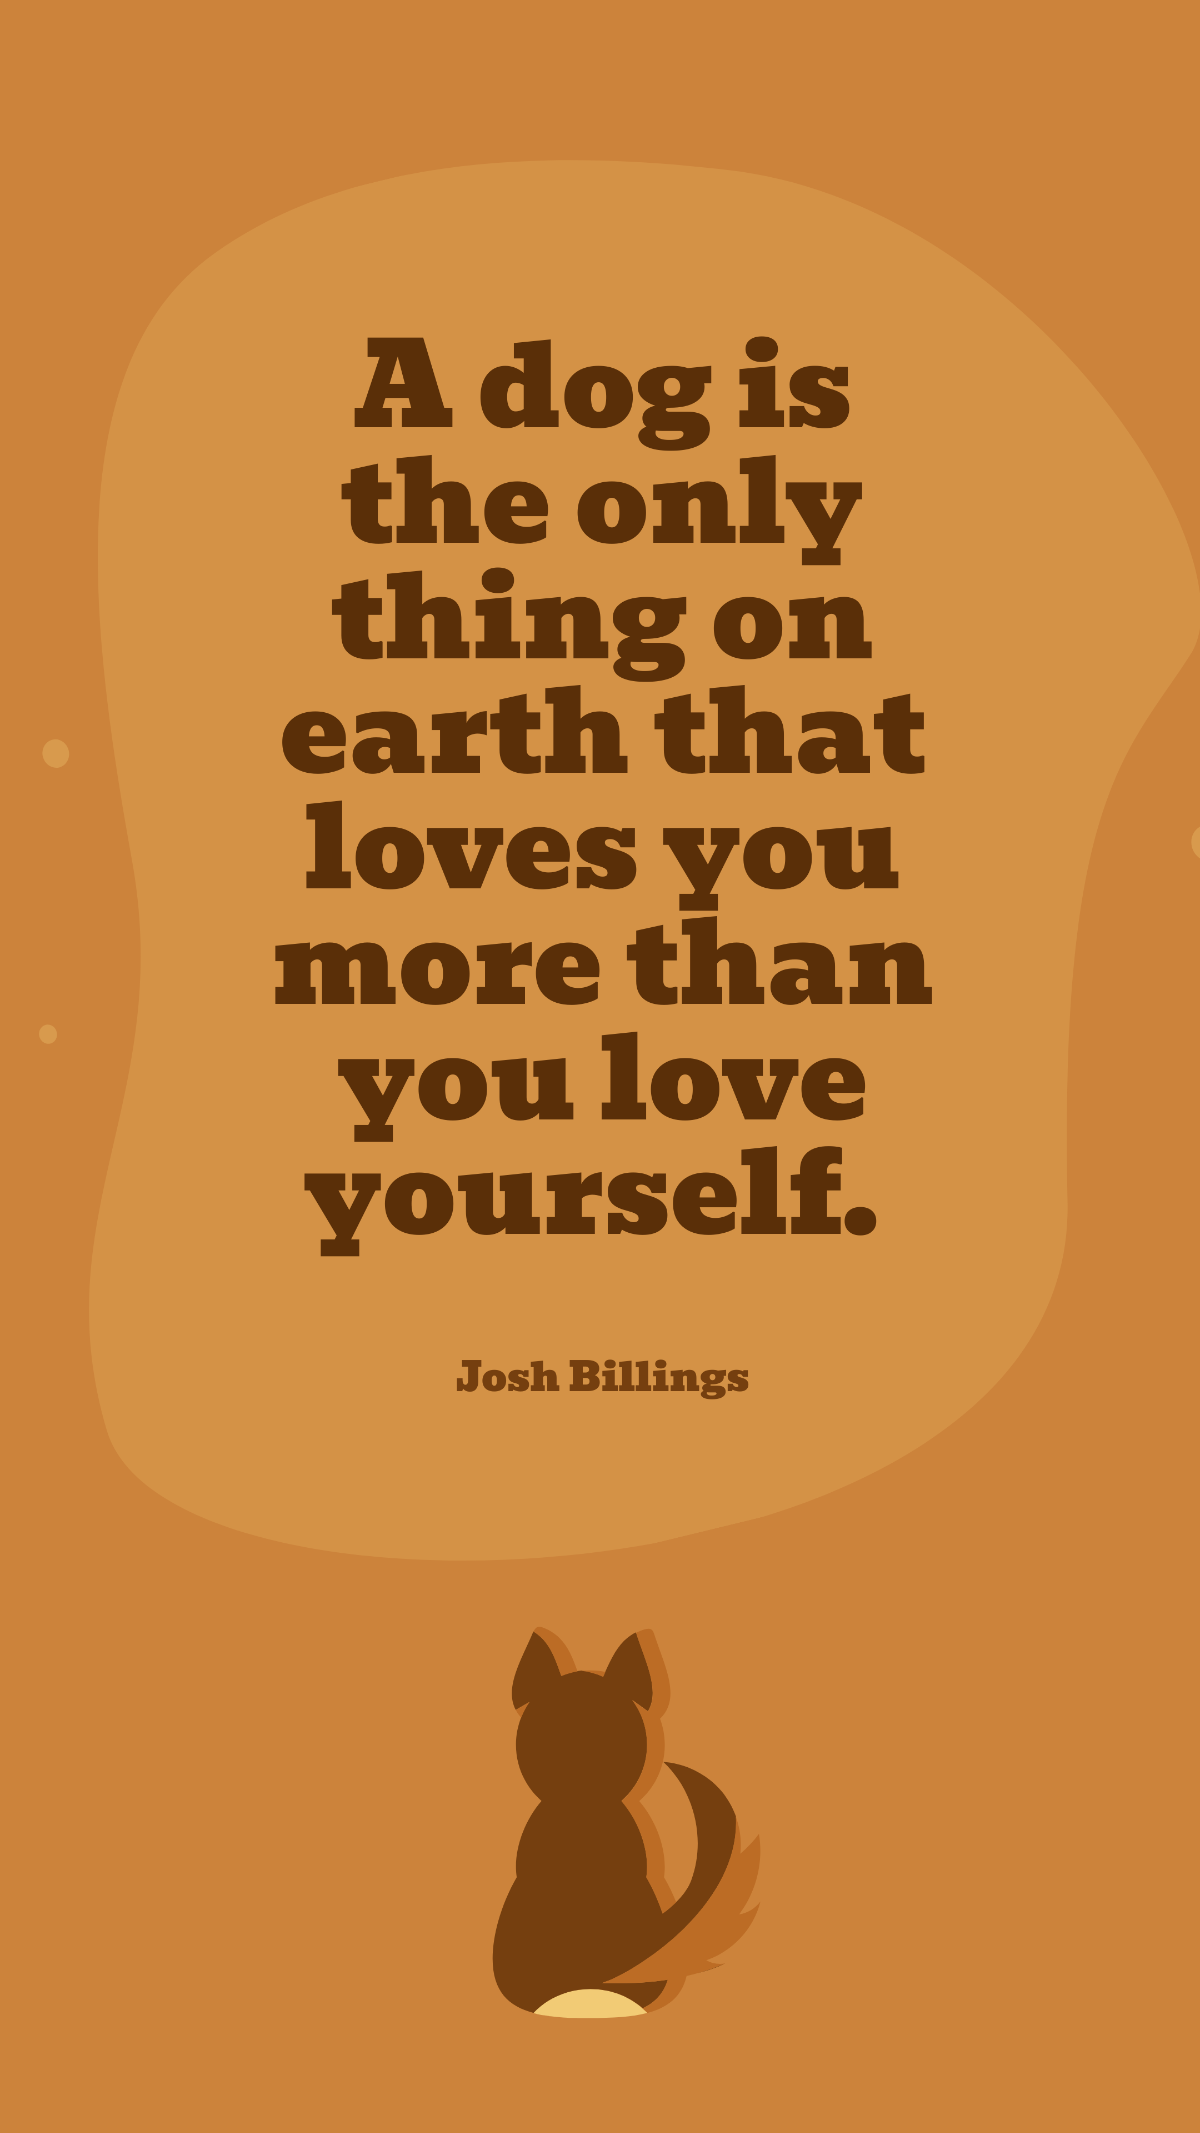 Josh Billings - A dog is the only thing on earth that loves you more than you love yourself.